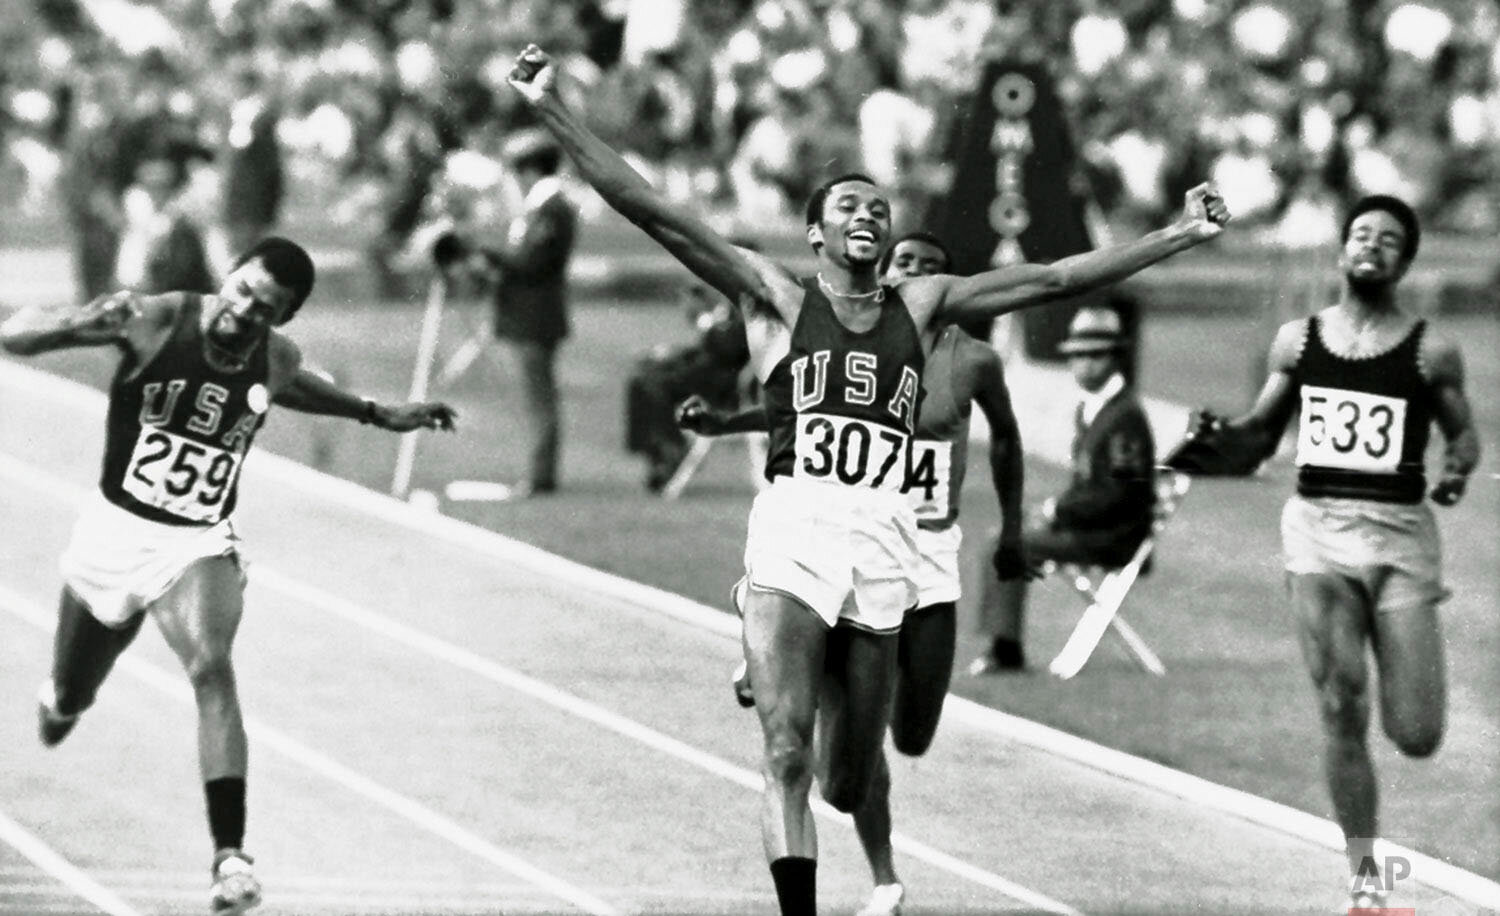  Tommie Smith of the U.S. raises his arms as he wins the 200 meters Olympic sprint in Mexico City Oct. 16, 1968.  Teammate John Carlos (259) finished third.  At far right is Michael Fray of Jamaica, who did not place.  Smith and Carlos caused controv